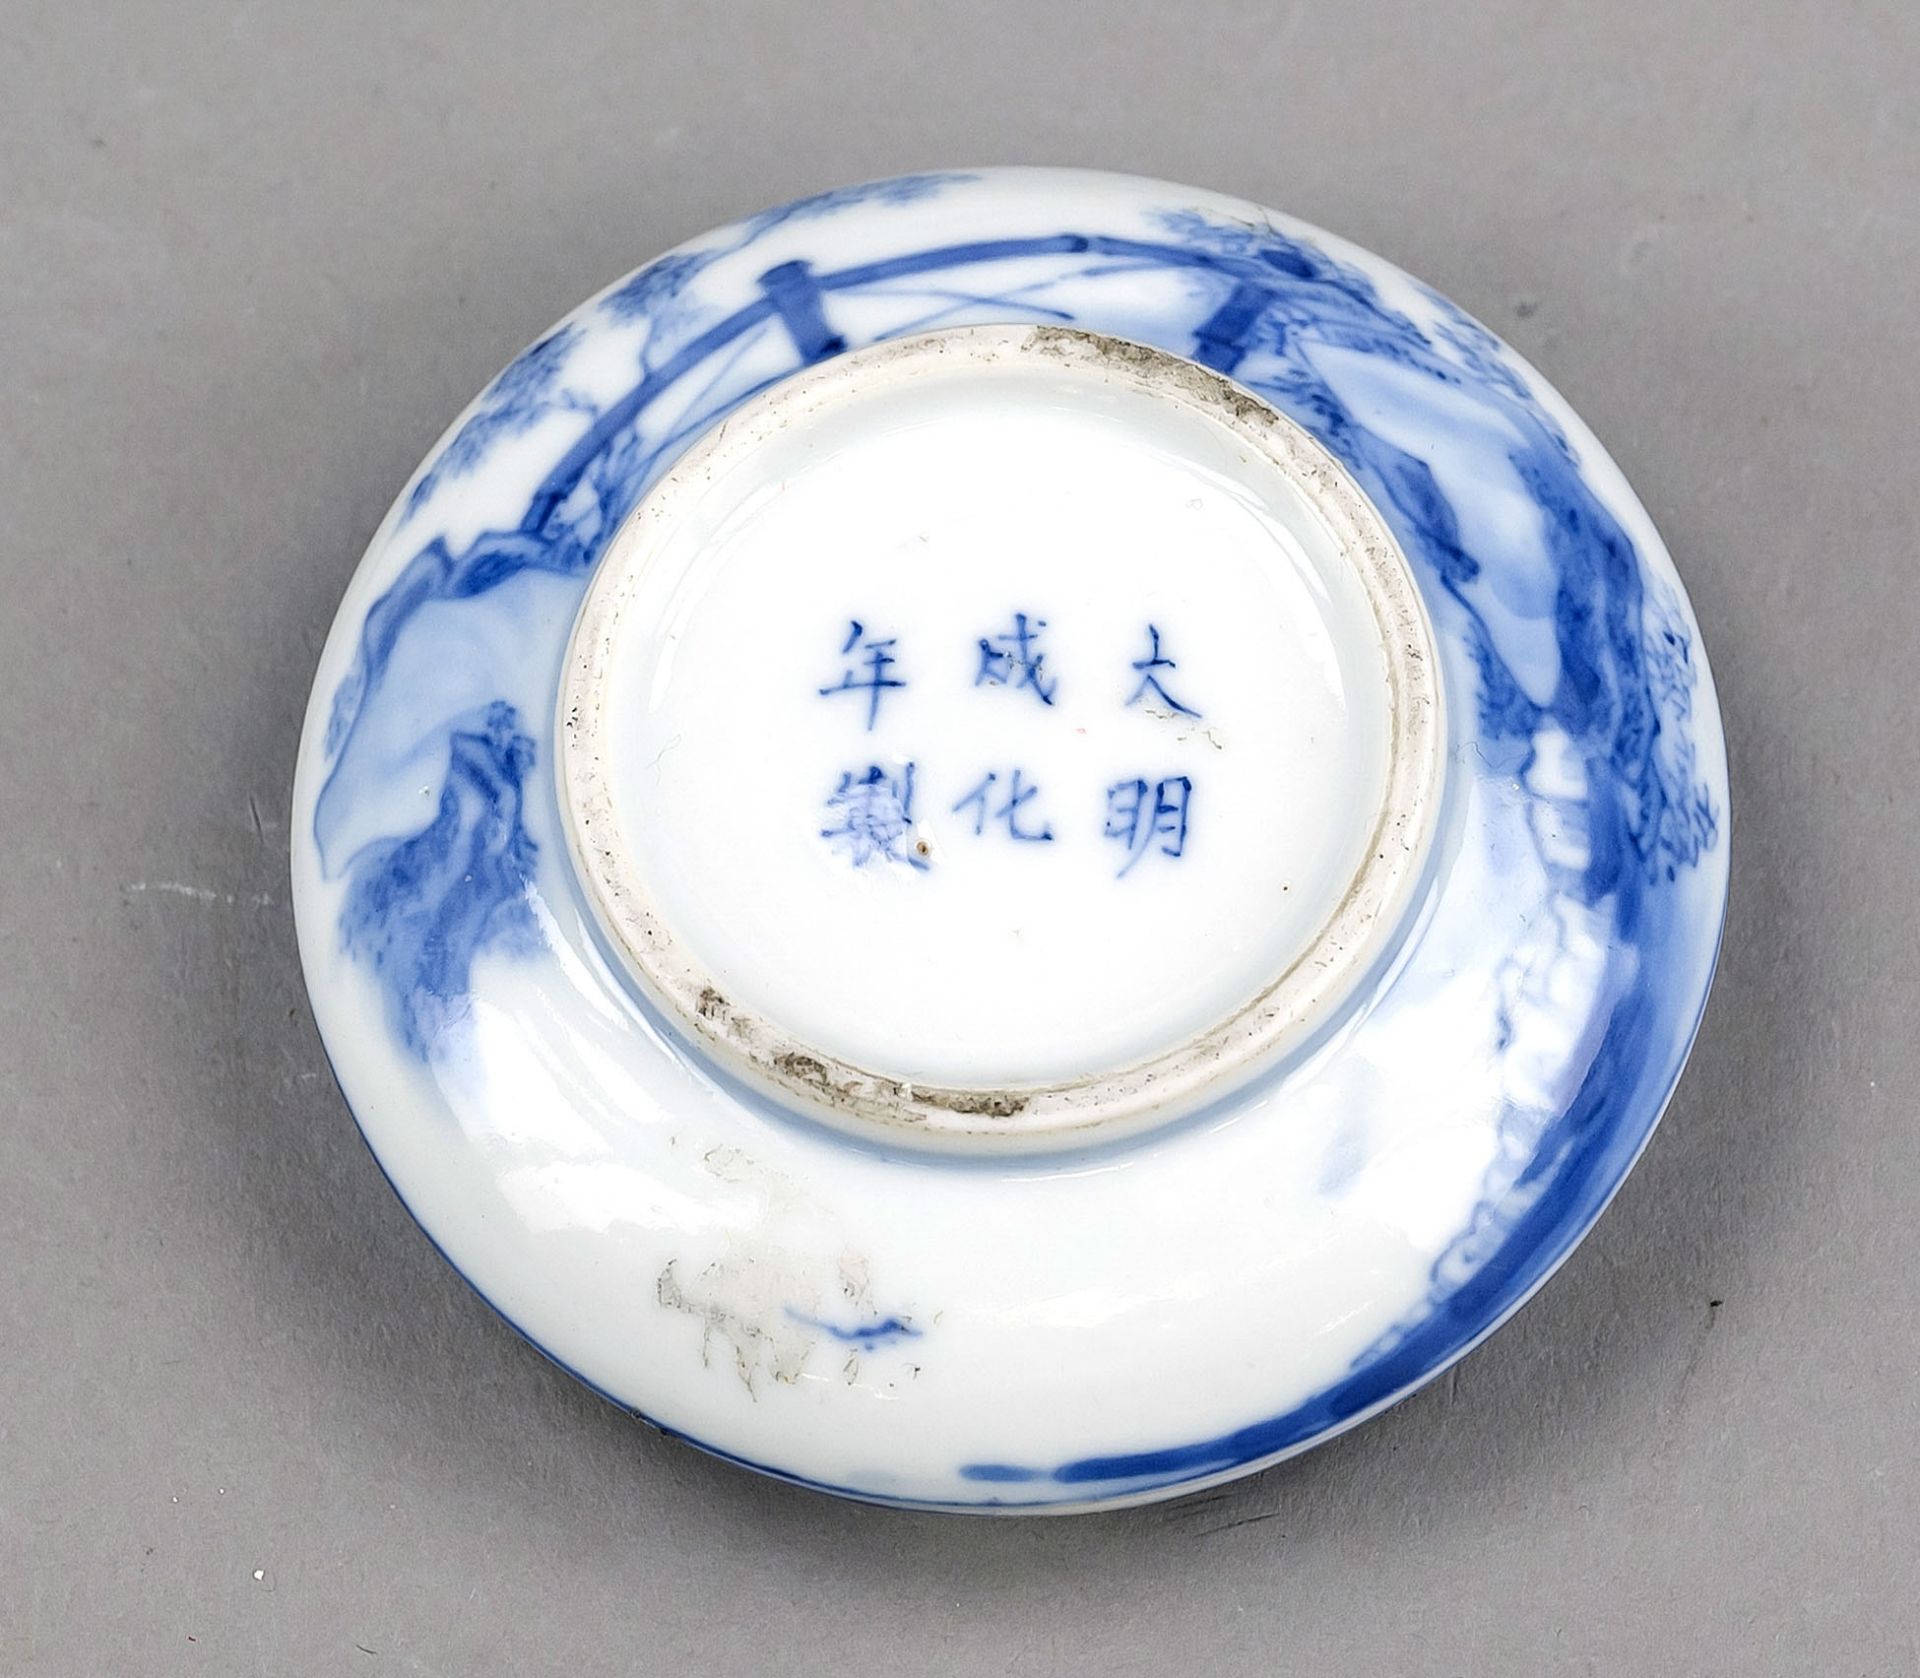 Blue and white sealing paste lidded box, China, probably 19th century Cobalt blue decoration on - Image 2 of 2